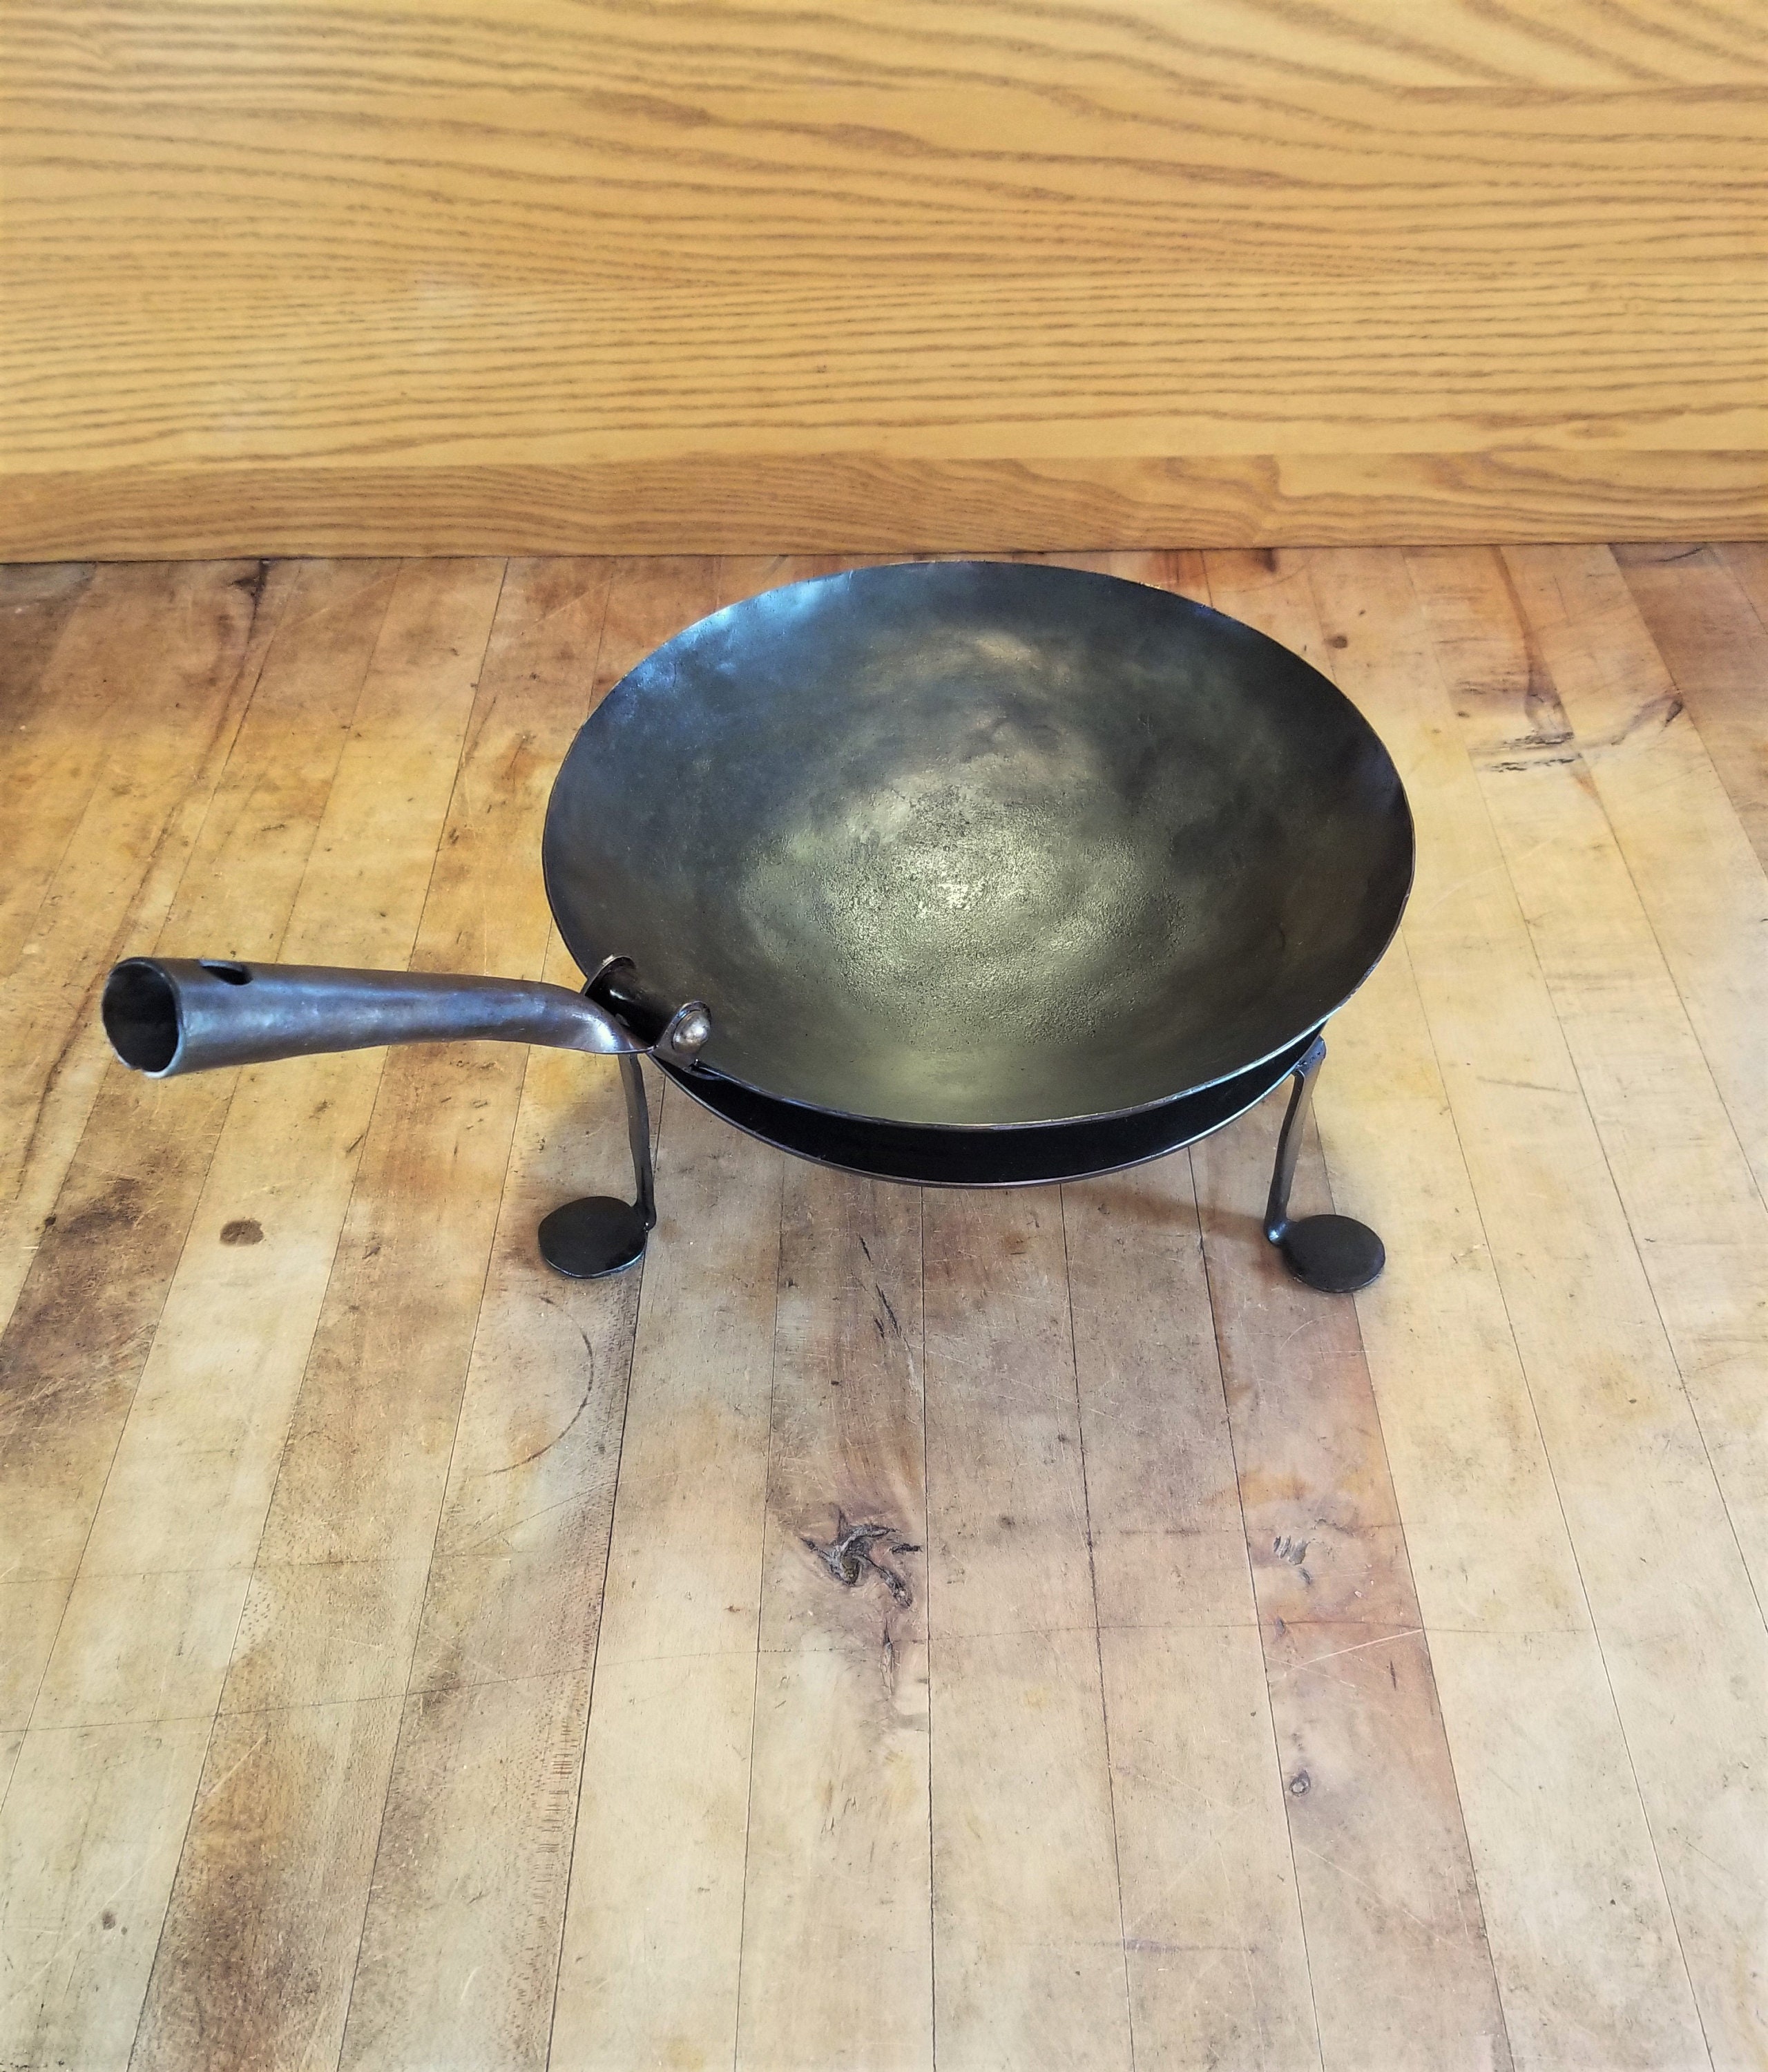 Traditional Indian Iron Kadai Wok - 18 Inches, Riveted/Welded Handles